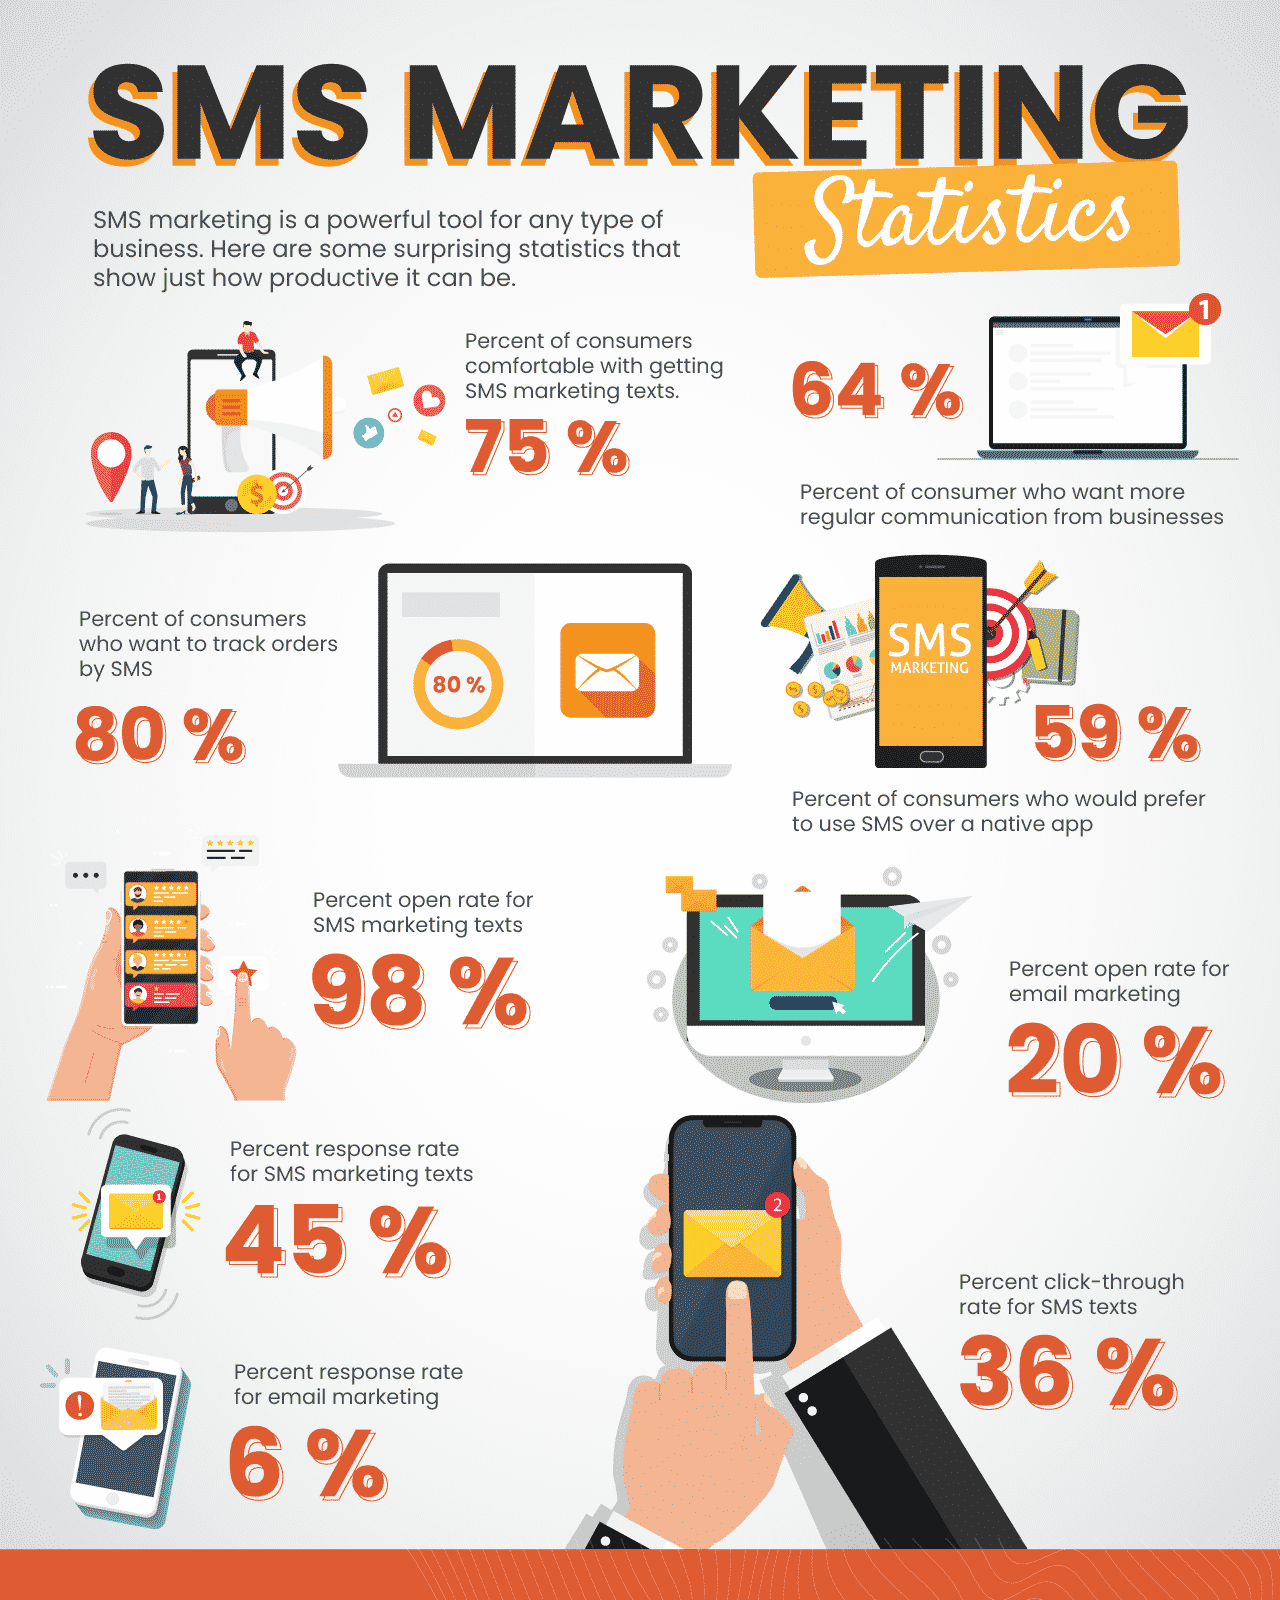 Infographic list of SMS marketing statistics and why it's beneficial for businesses to use